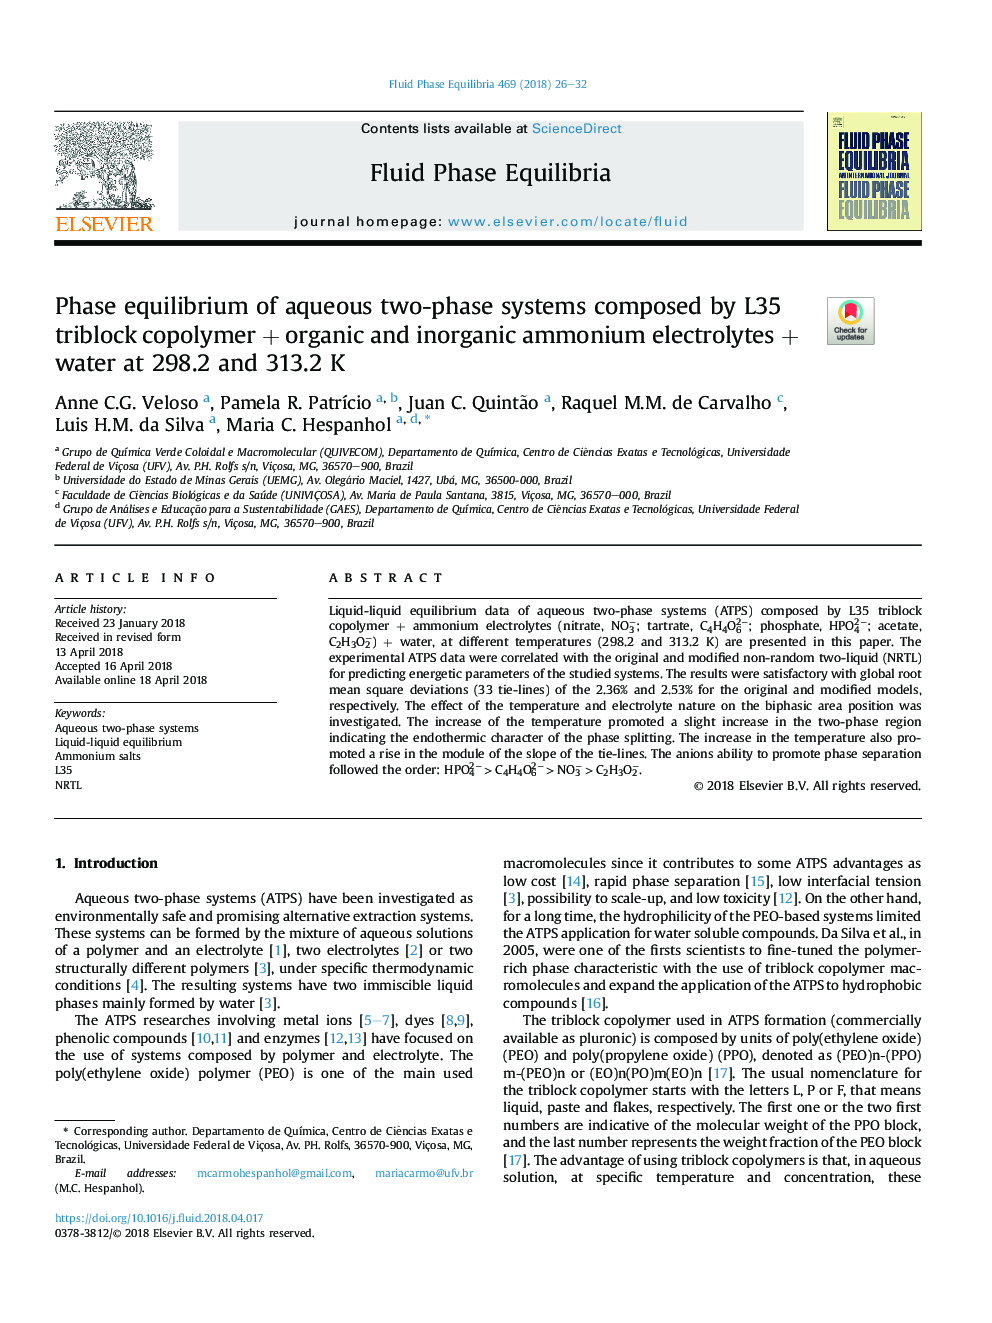 Phase equilibrium of aqueous two-phase systems composed by L35 triblock copolymerÂ + organic and inorganic ammonium electrolytesÂ + water at 298.2 and 313.2Â K